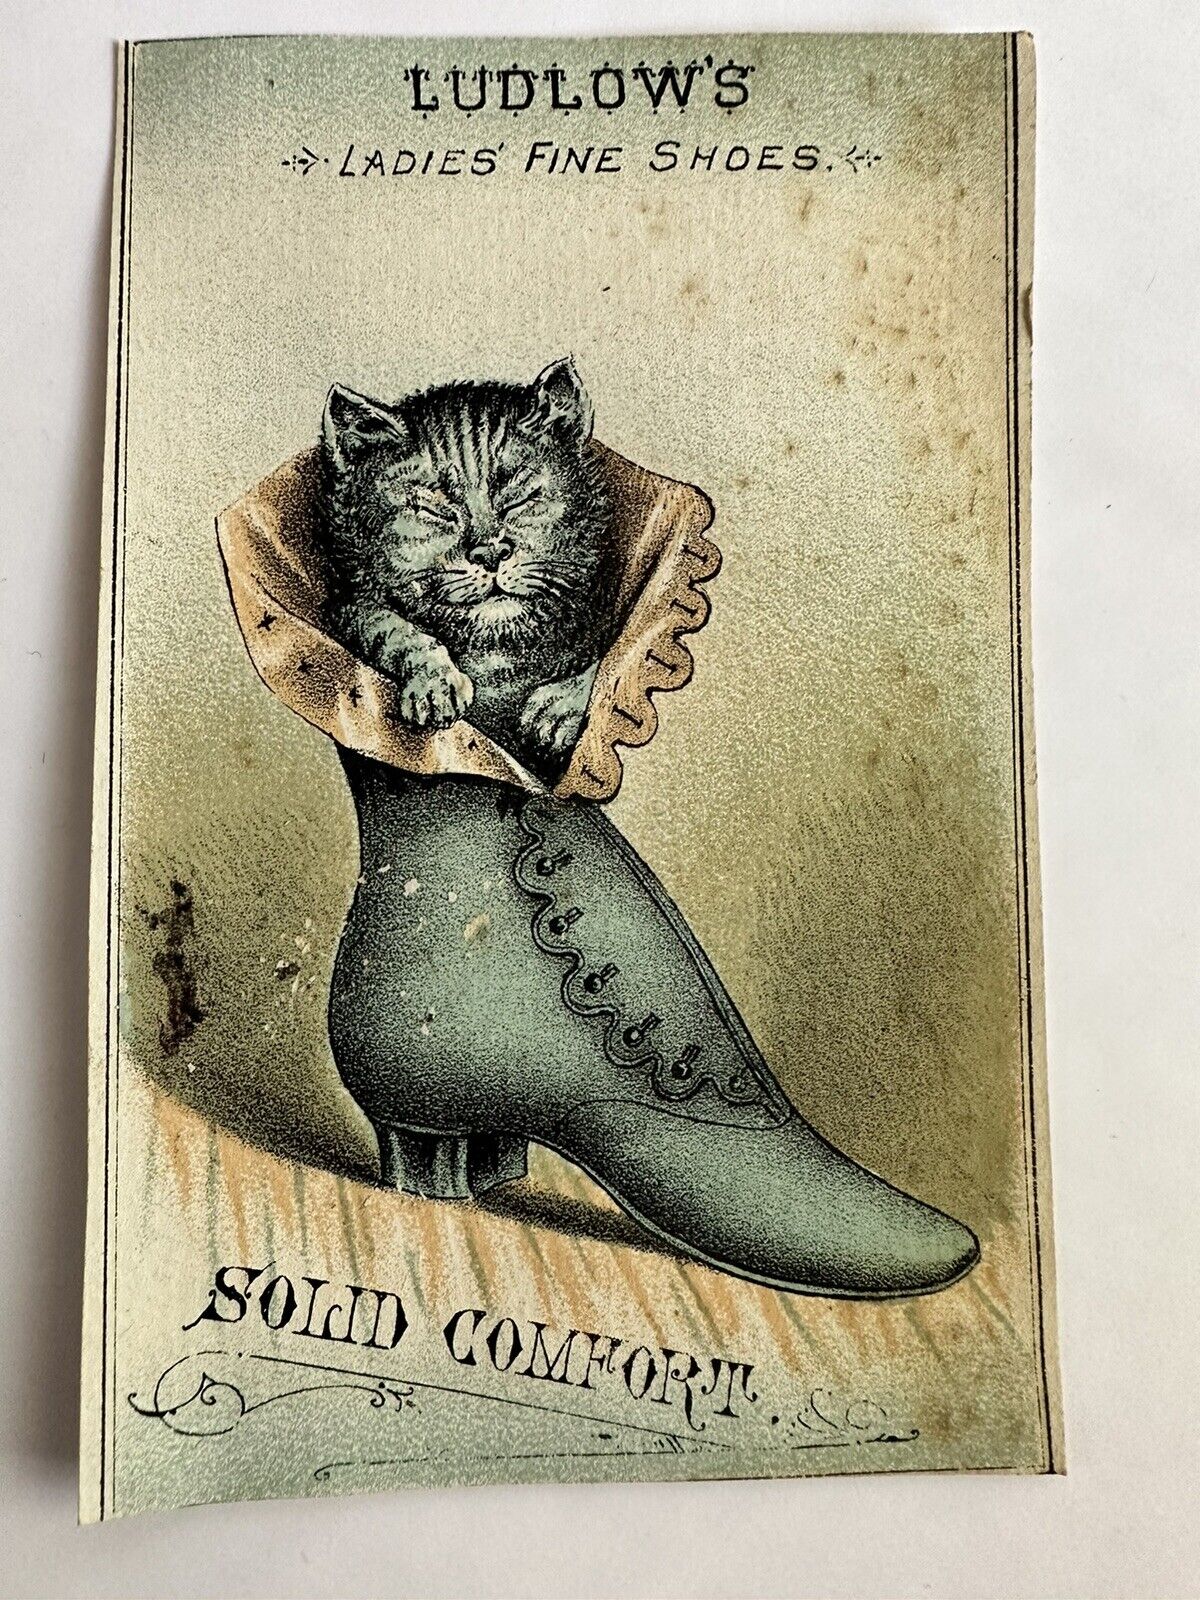 VICTORIAN TRADE CARD LUDLOW’S LADIES’ FINE SHOES ALBANY NY c1880s A98